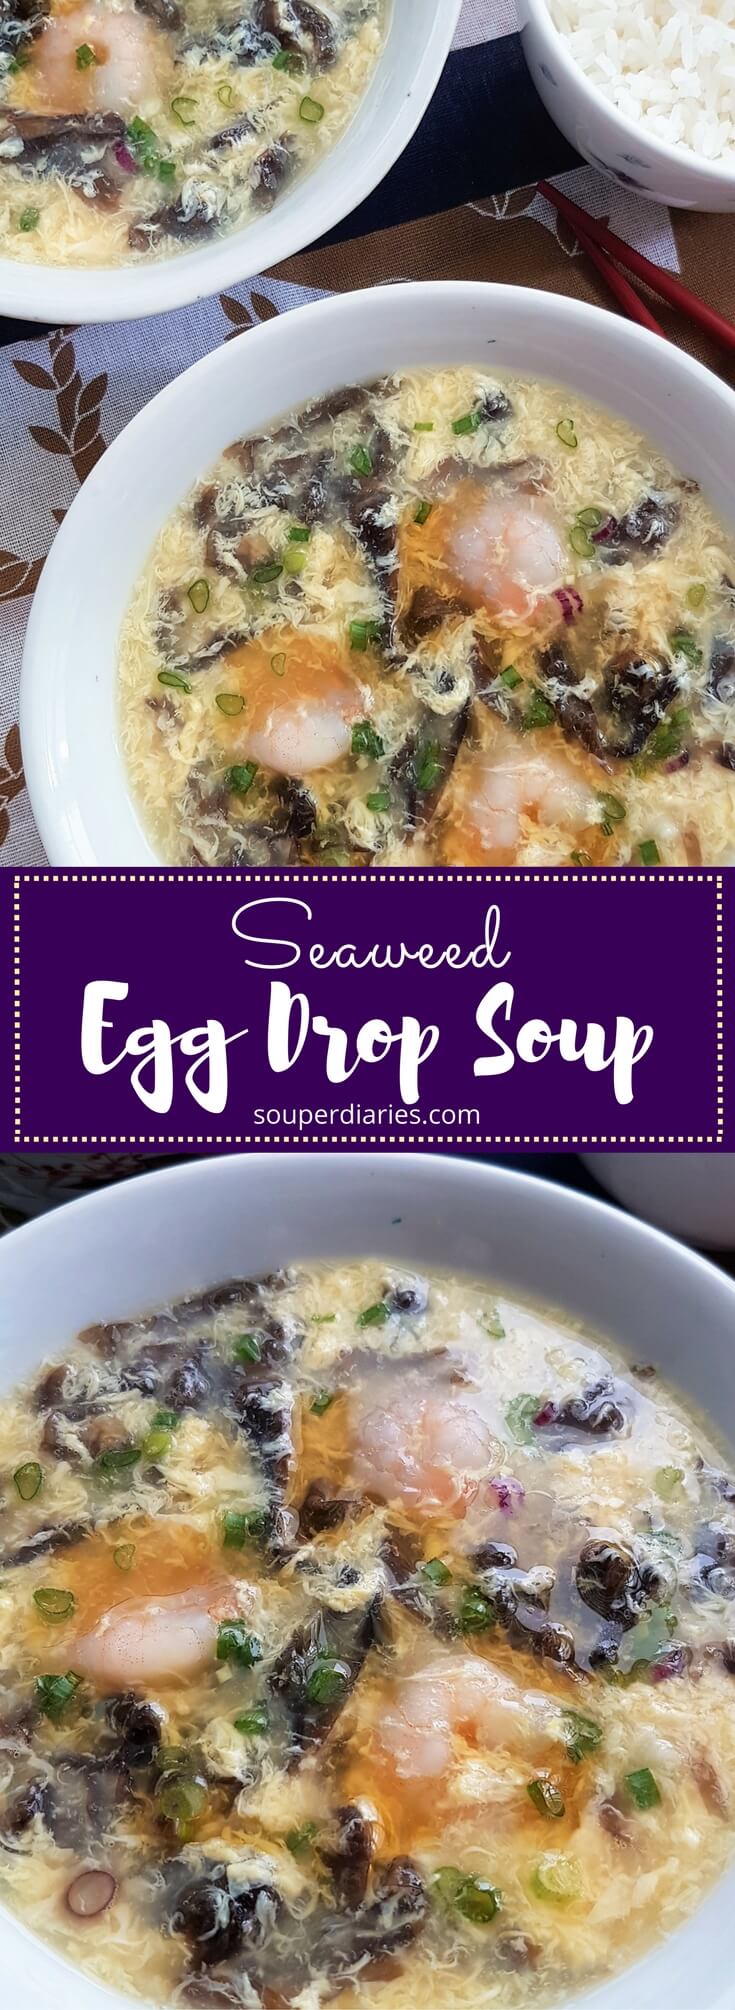 Simple egg drop soup recipe with seaweed